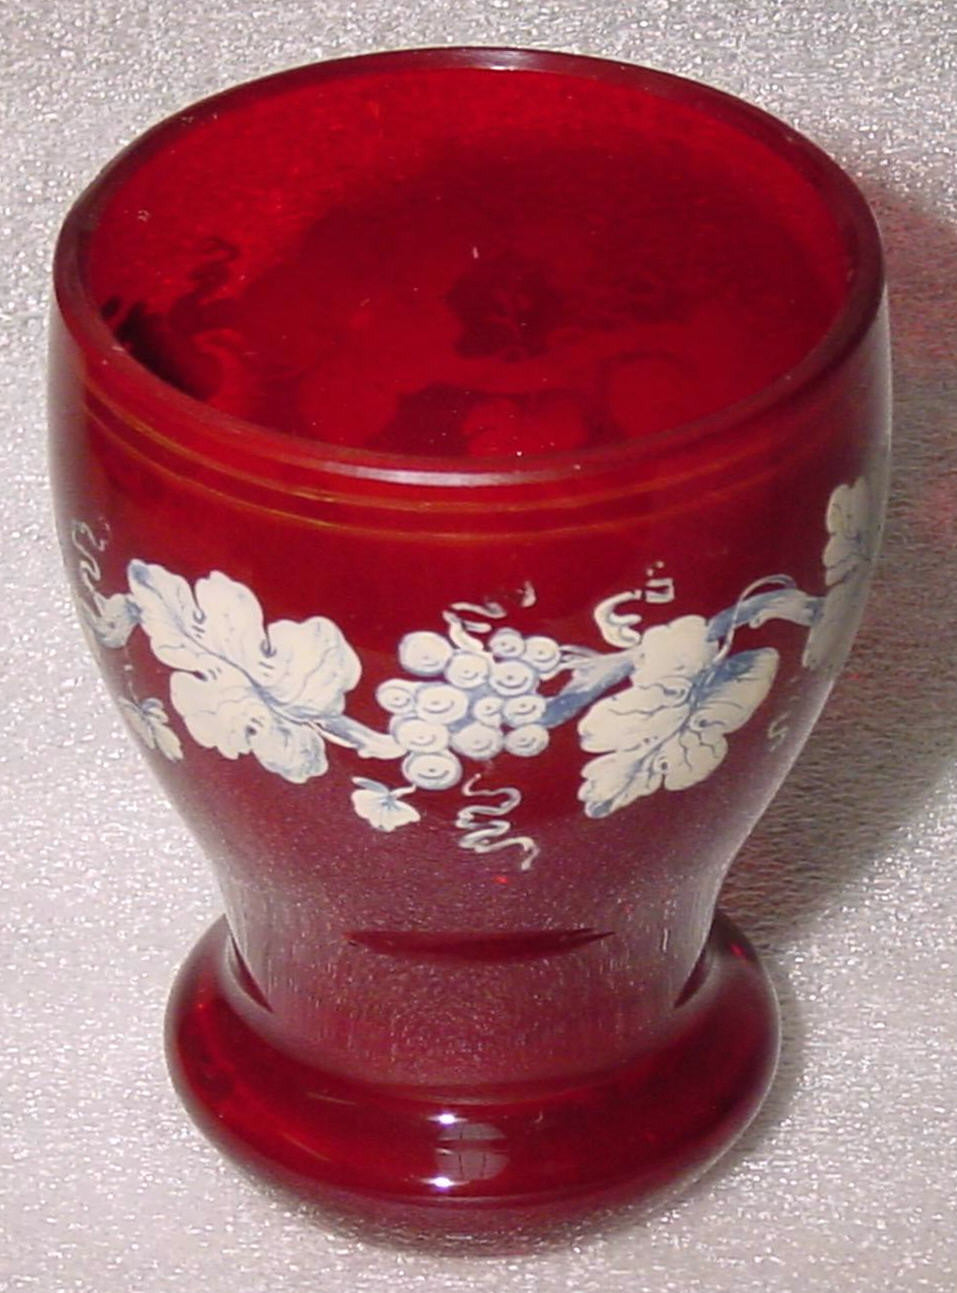 999326 Ruby Friendship Cup With White Painted Grapes & Leaves, Bohemian Glassware, Antique, - ReeceFurniture.com - Free Local Pick Ups: Frankenmuth, MI, Indianapolis, IN, Chicago Ridge, IL, and Detroit, MI